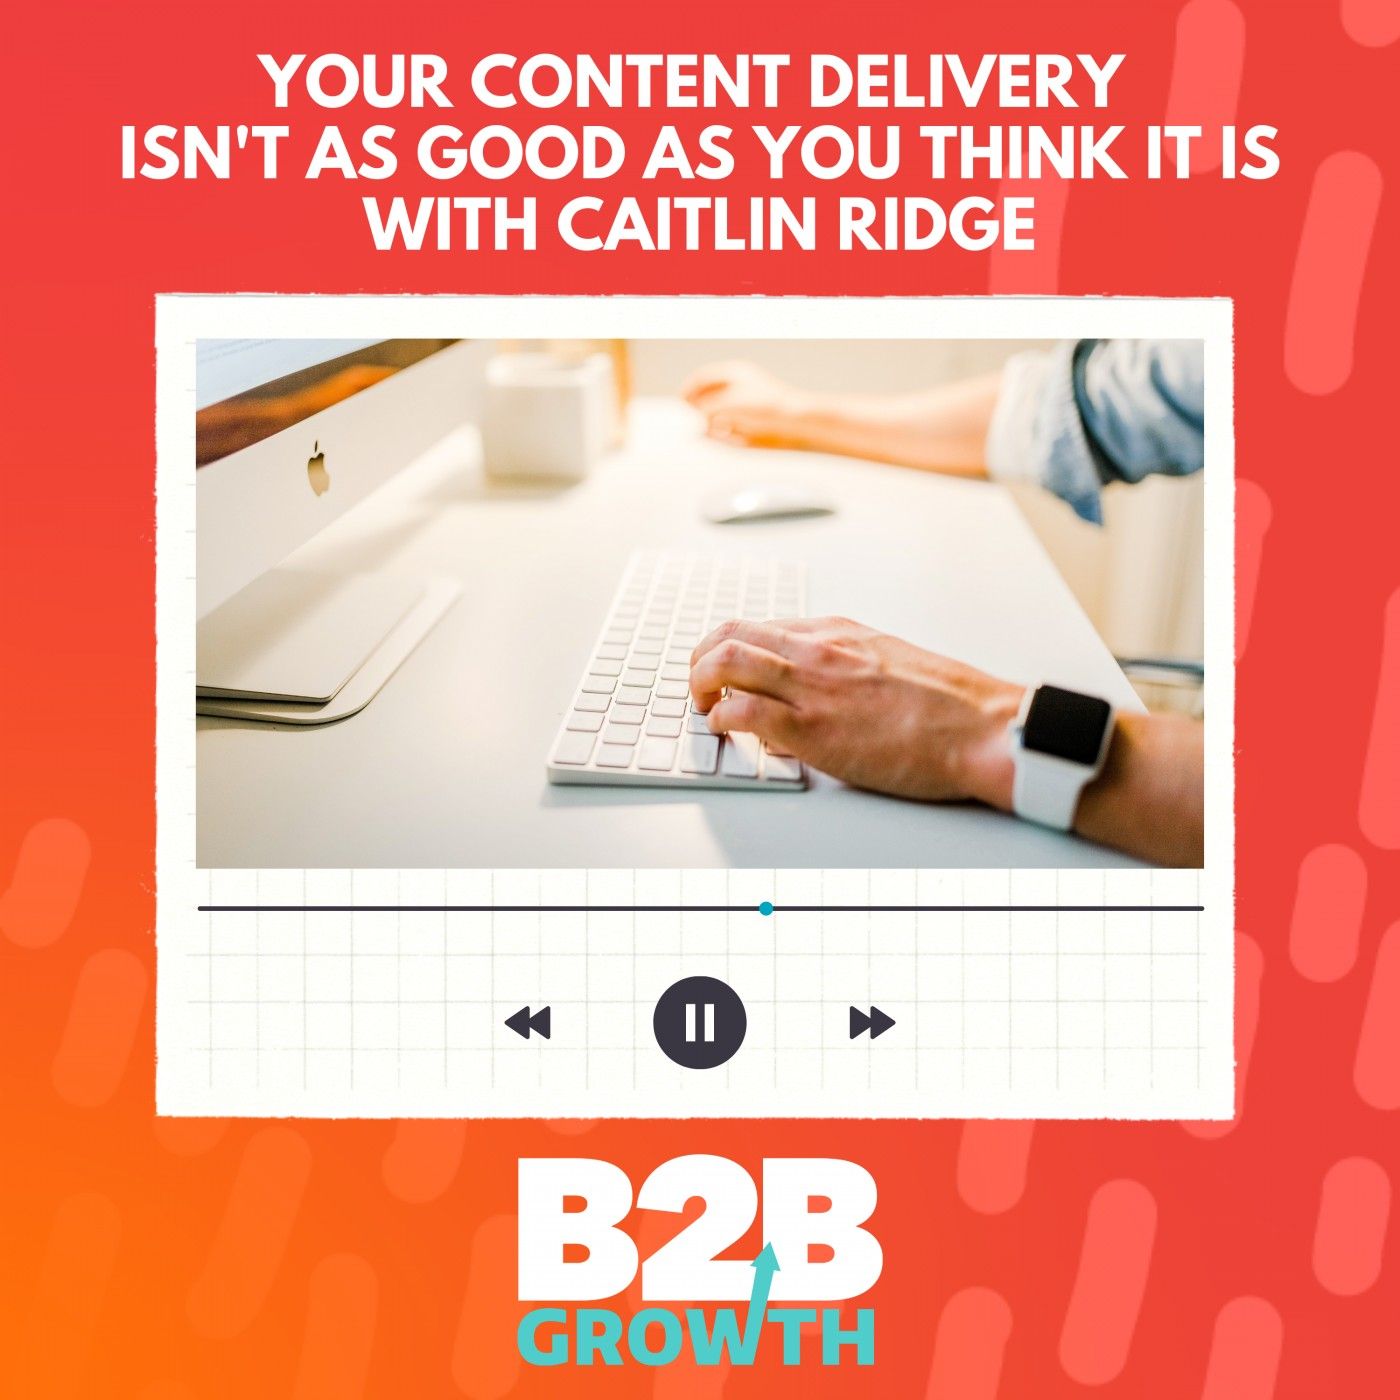 Your Content Delivery Isn’t as Good as You Think It Is, with Caitlin Ridge